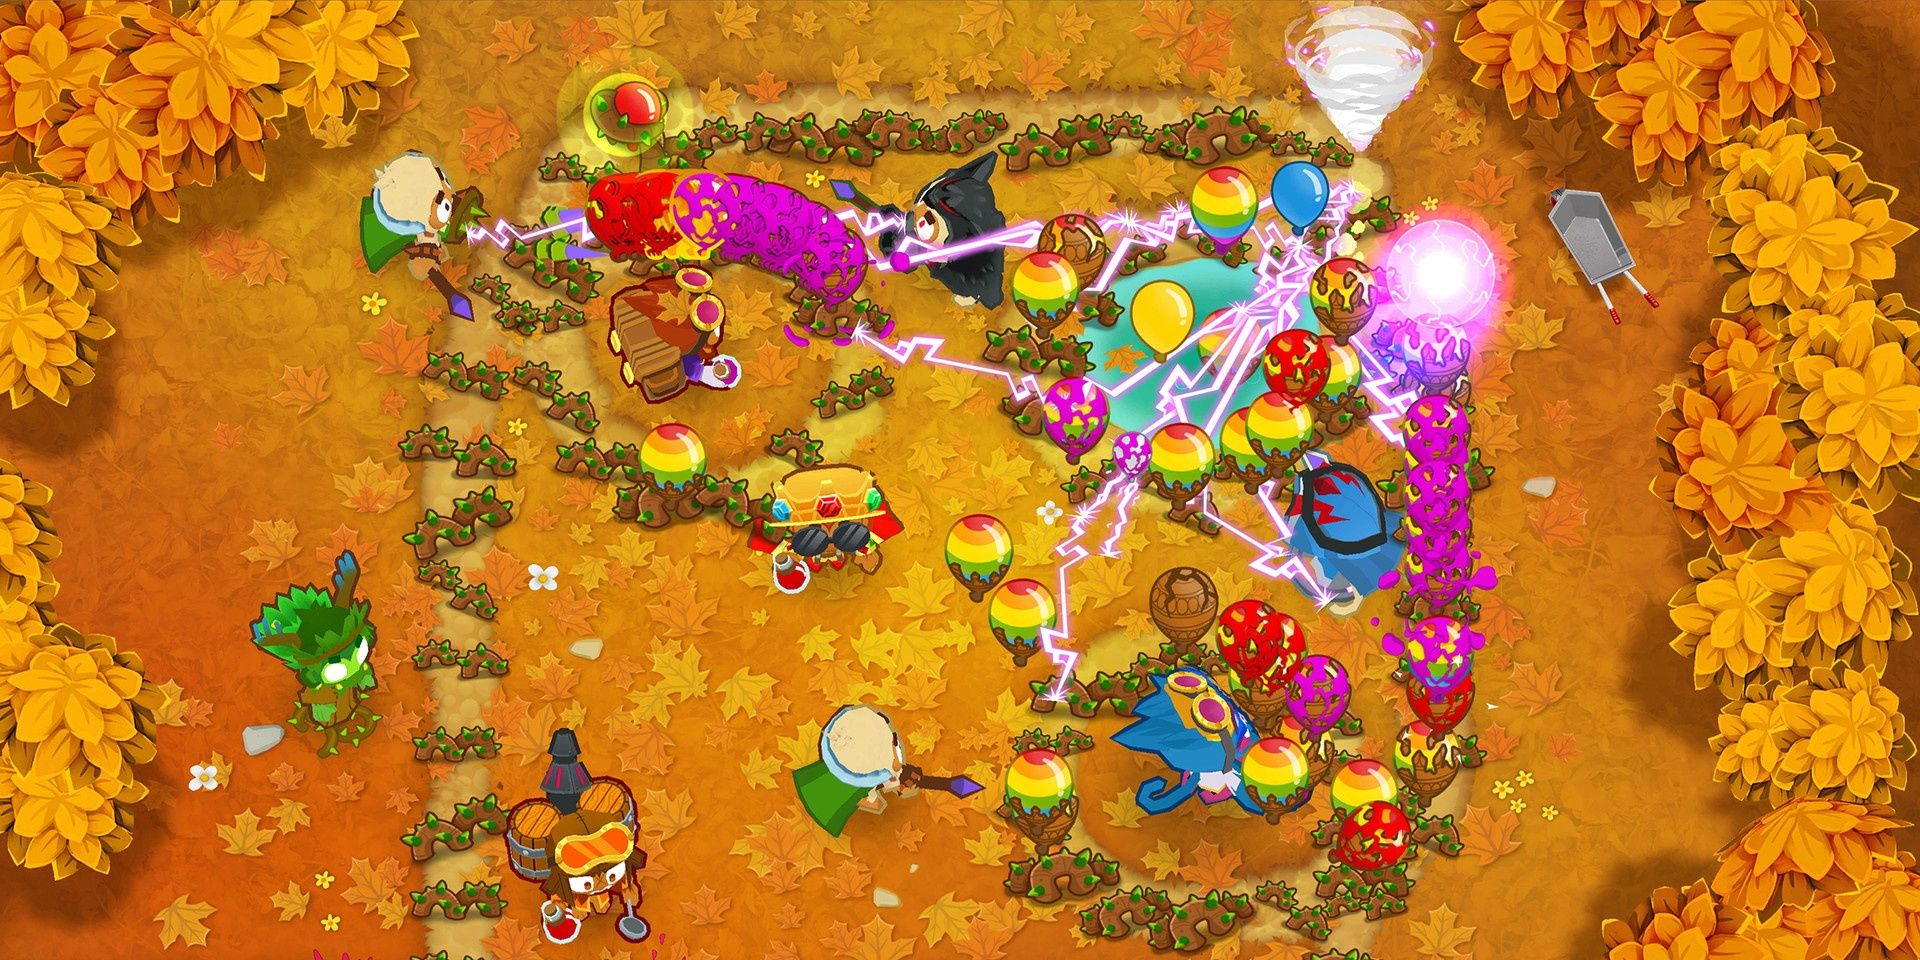 A screenshot showing gameplay in Bloons TD 6